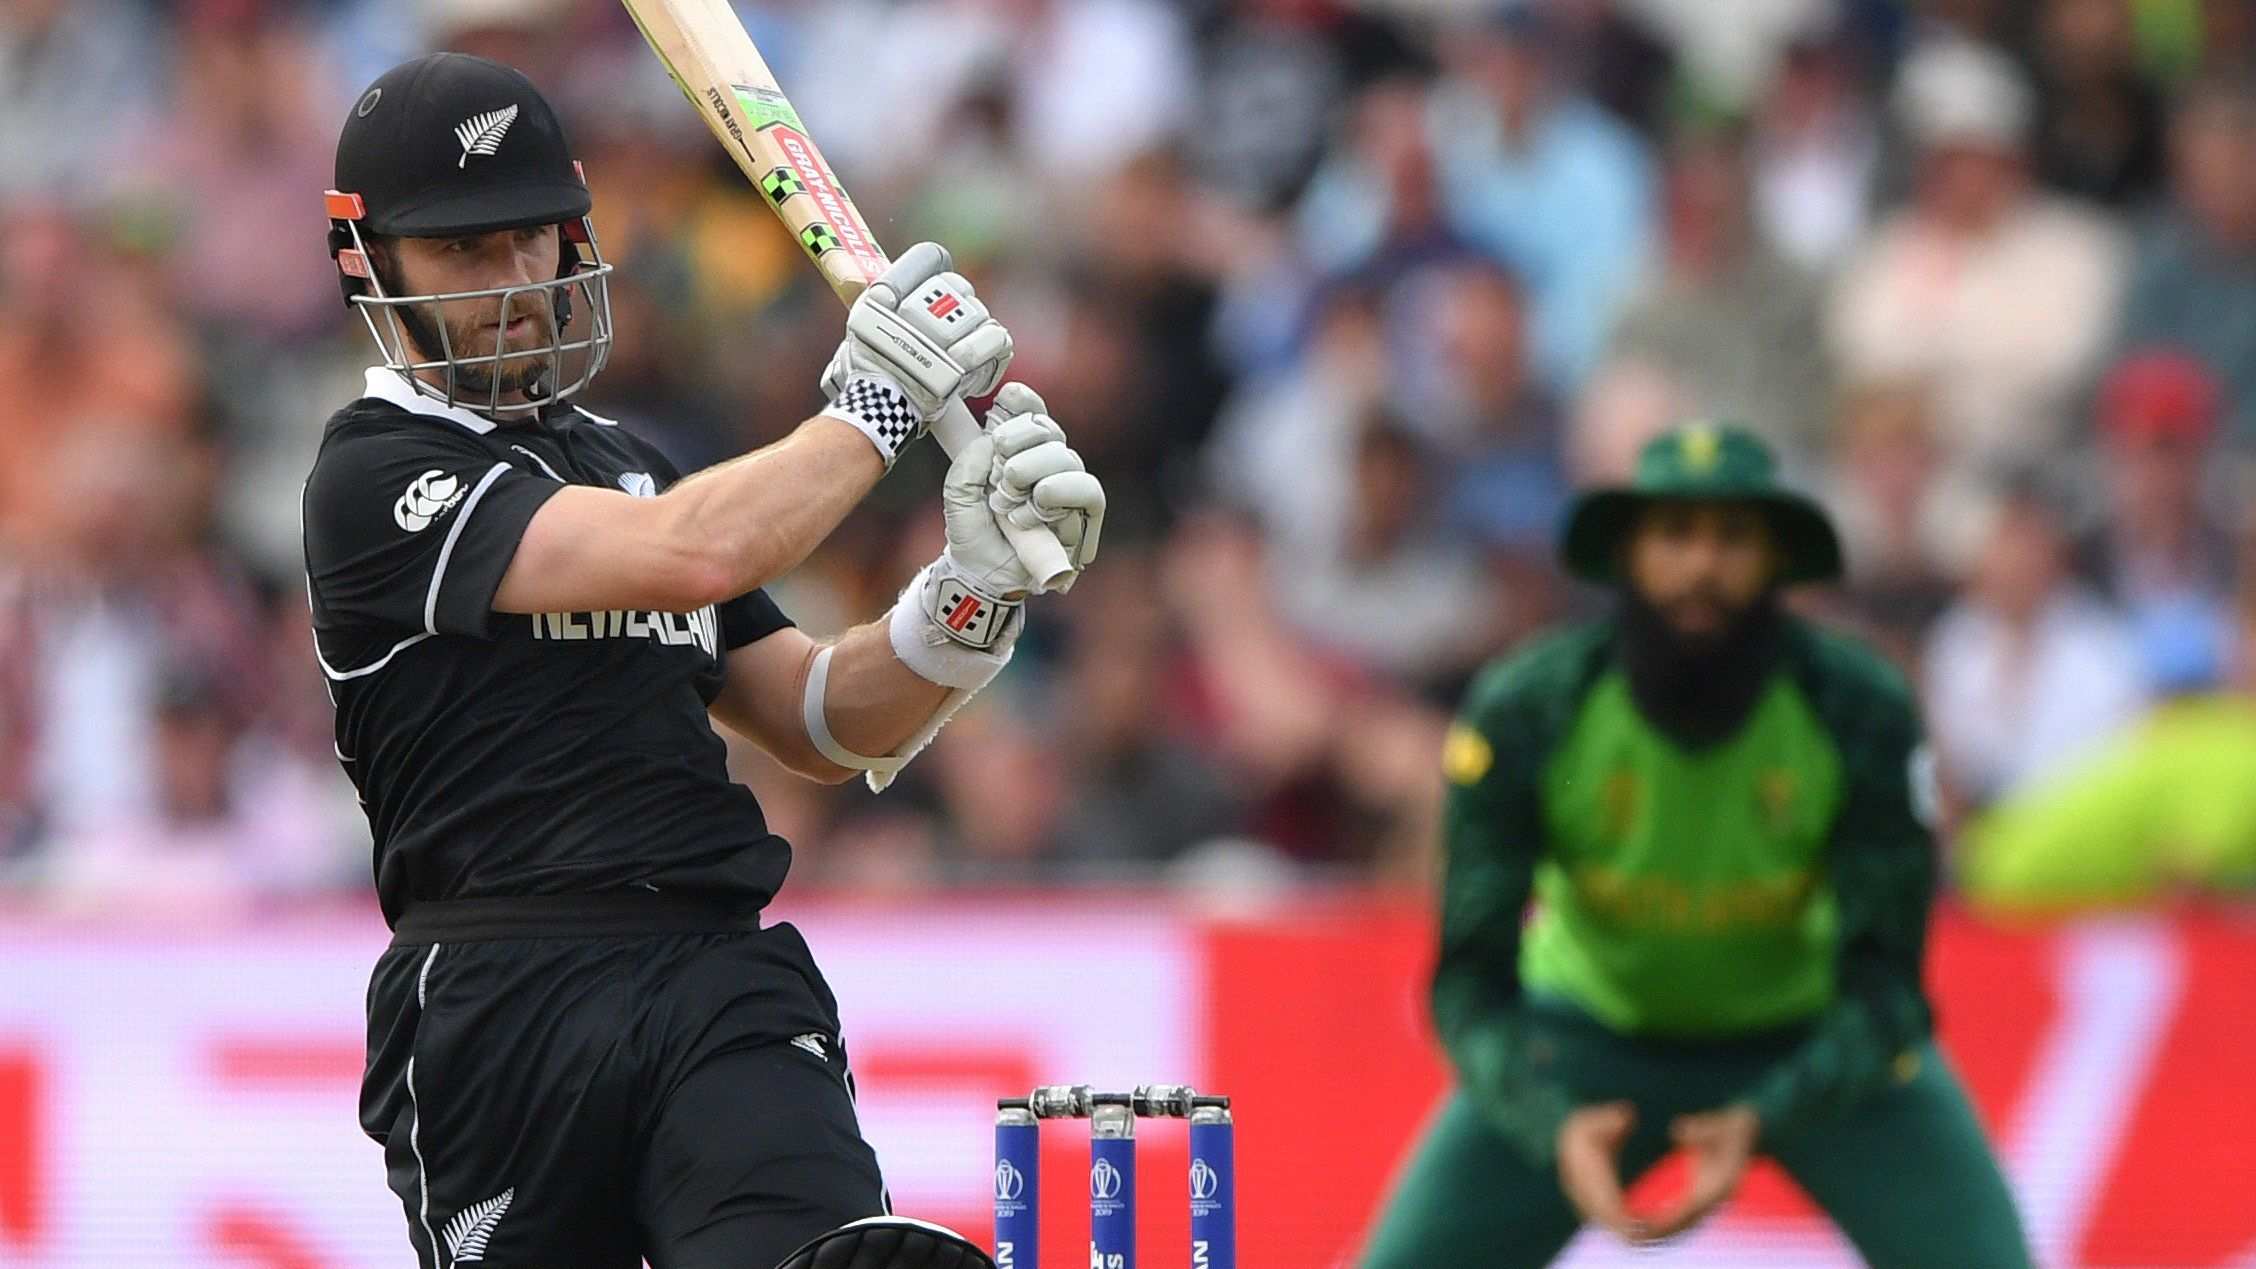 Kane Williamson ruled out of Bangladesh ODIs with elbow injury